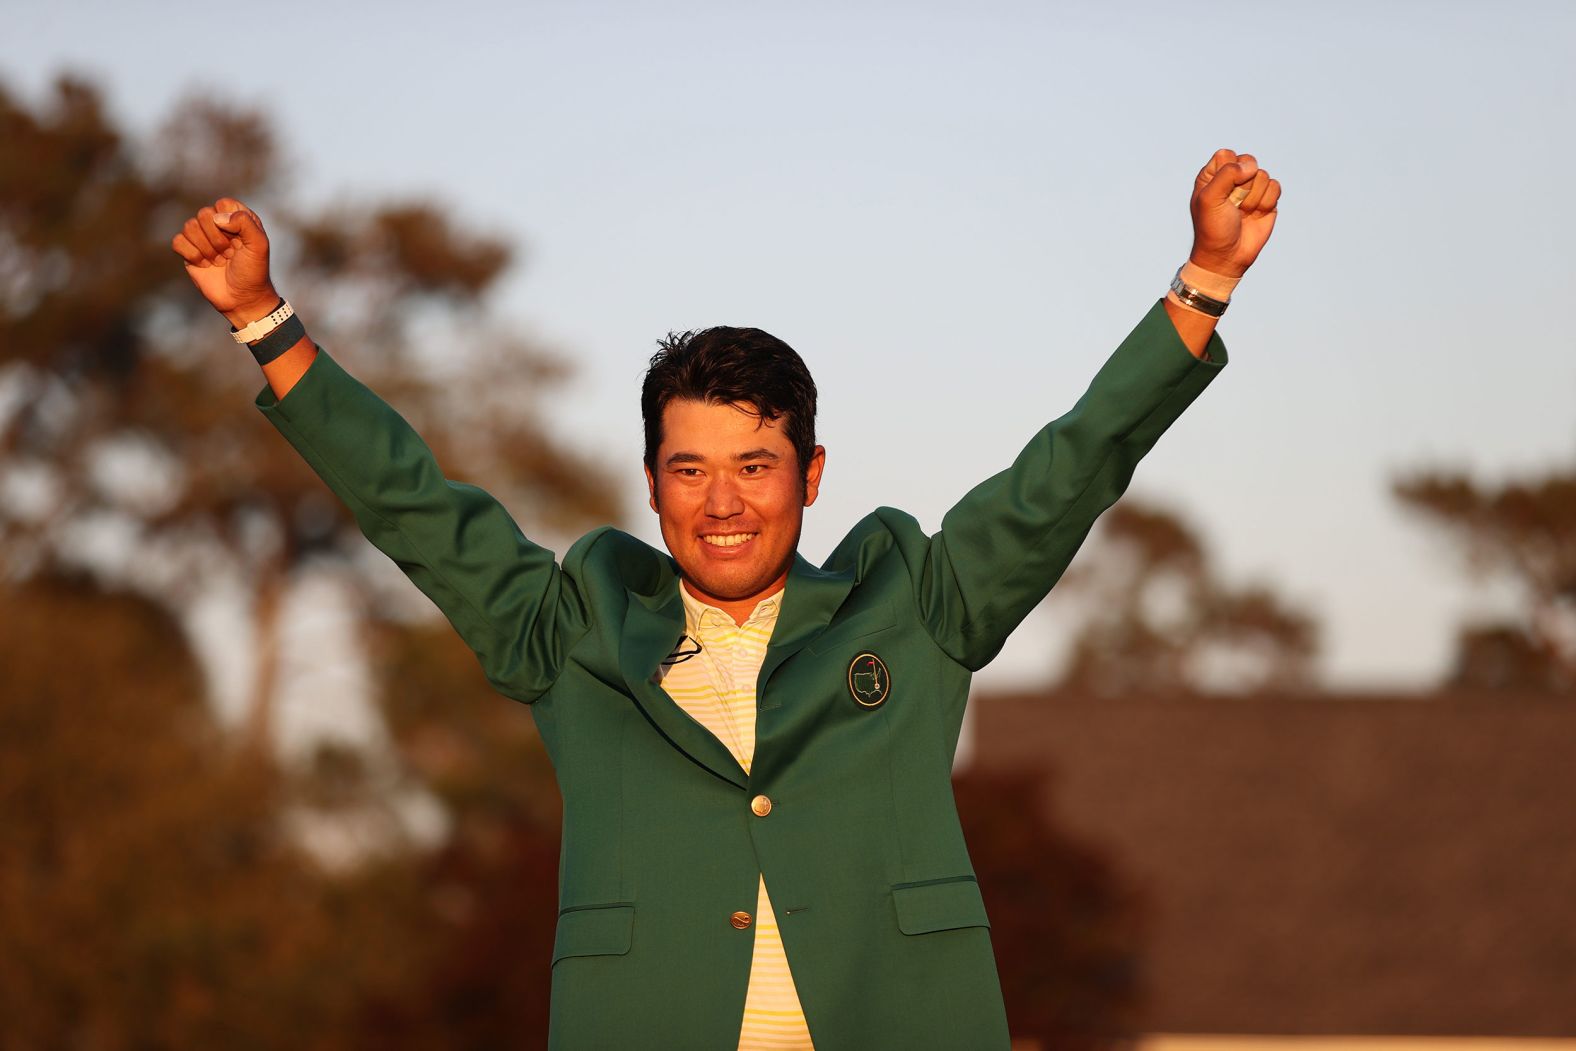 April 11: Hideki Matsuyama lifts his arms aloft in celebration after romping to victory at the Masters. He became the first Japanese man to win a major. 